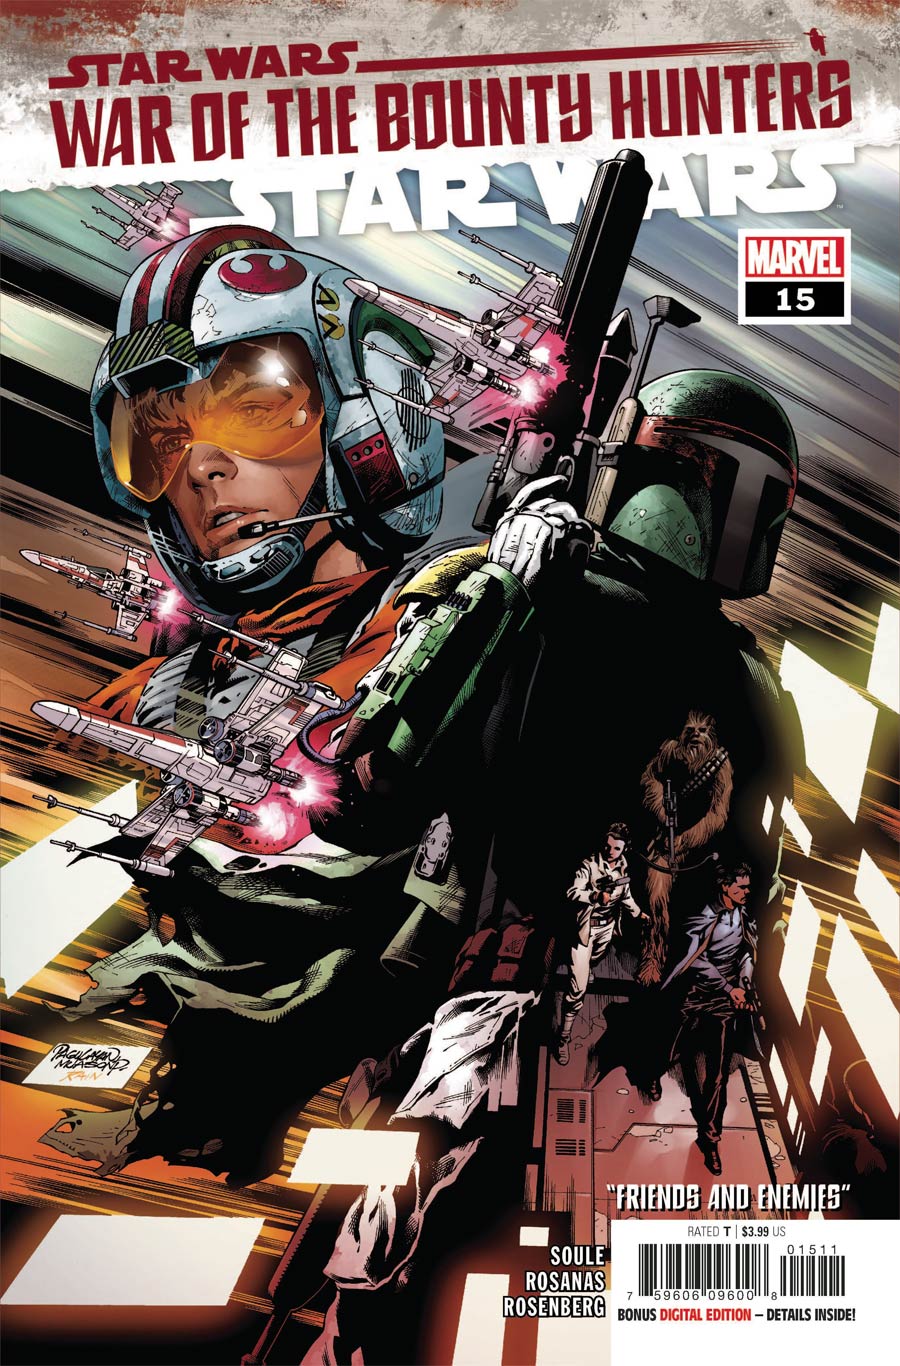 Star Wars Vol 5 #15 Cover A Regular Carlo Pagulayan Cover (War Of The Bounty Hunters Tie-In)